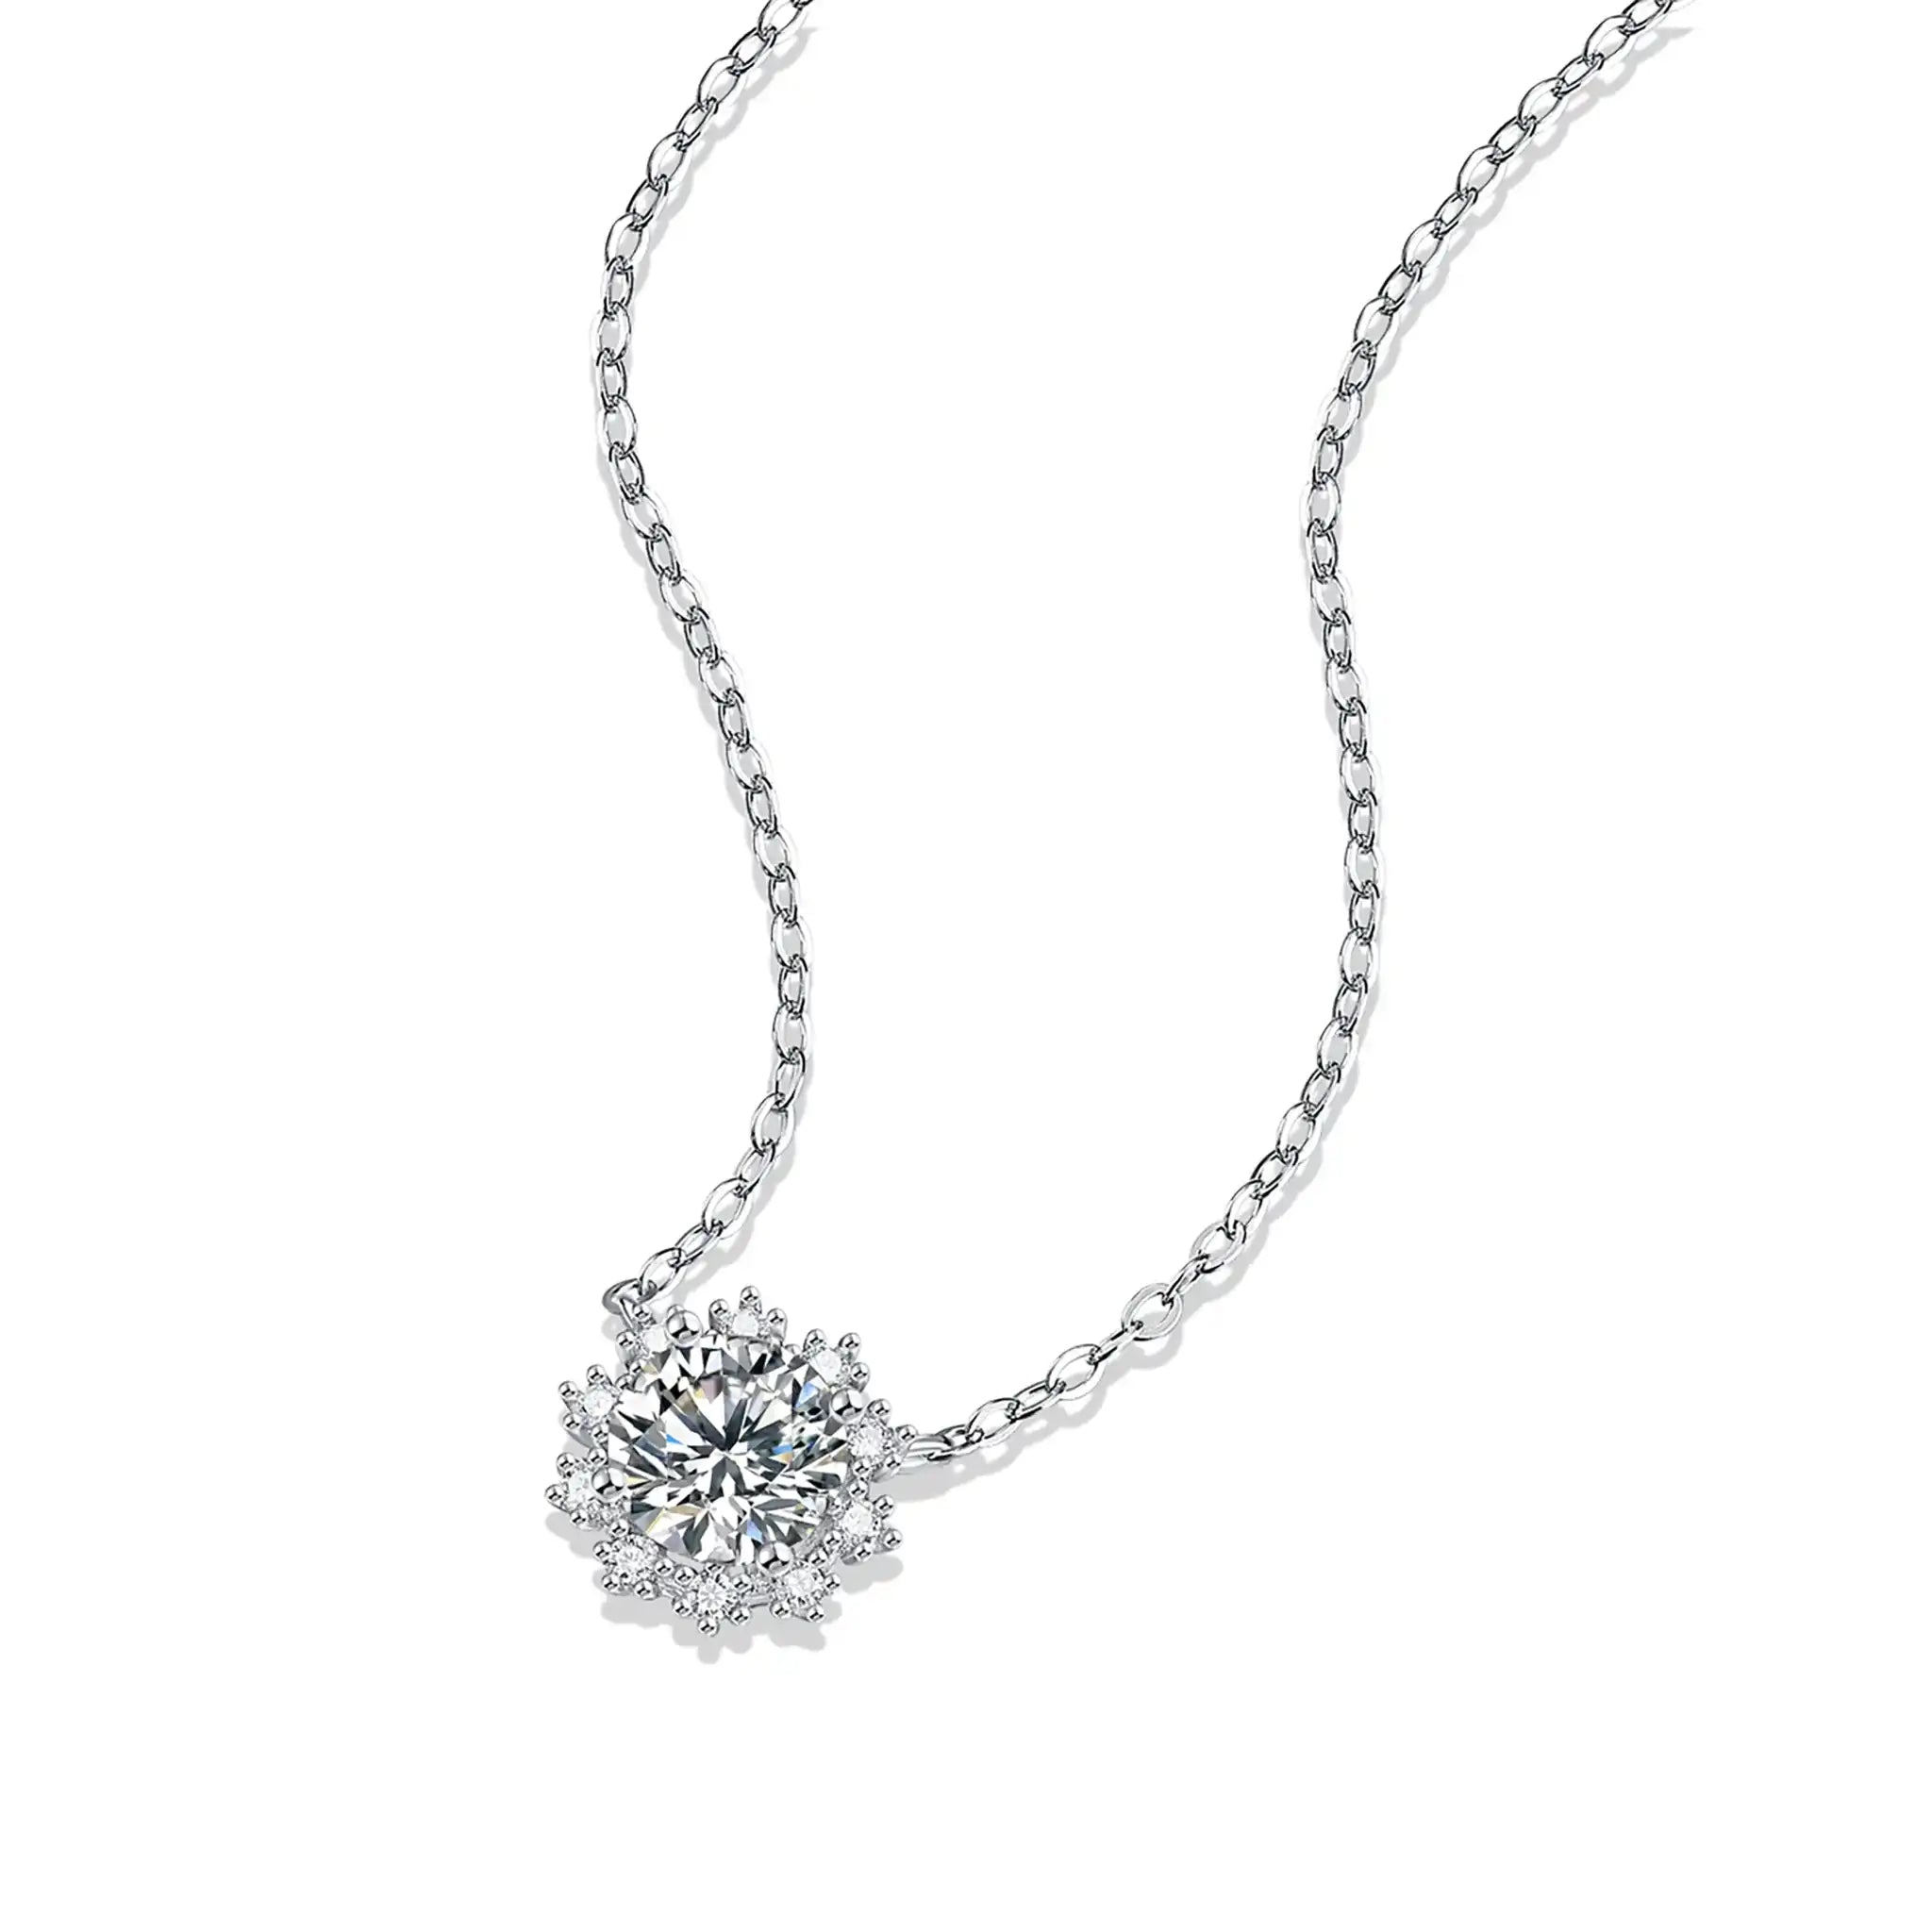 Snowflake-Moissanite-Sterling-Silver-Necklace-N6